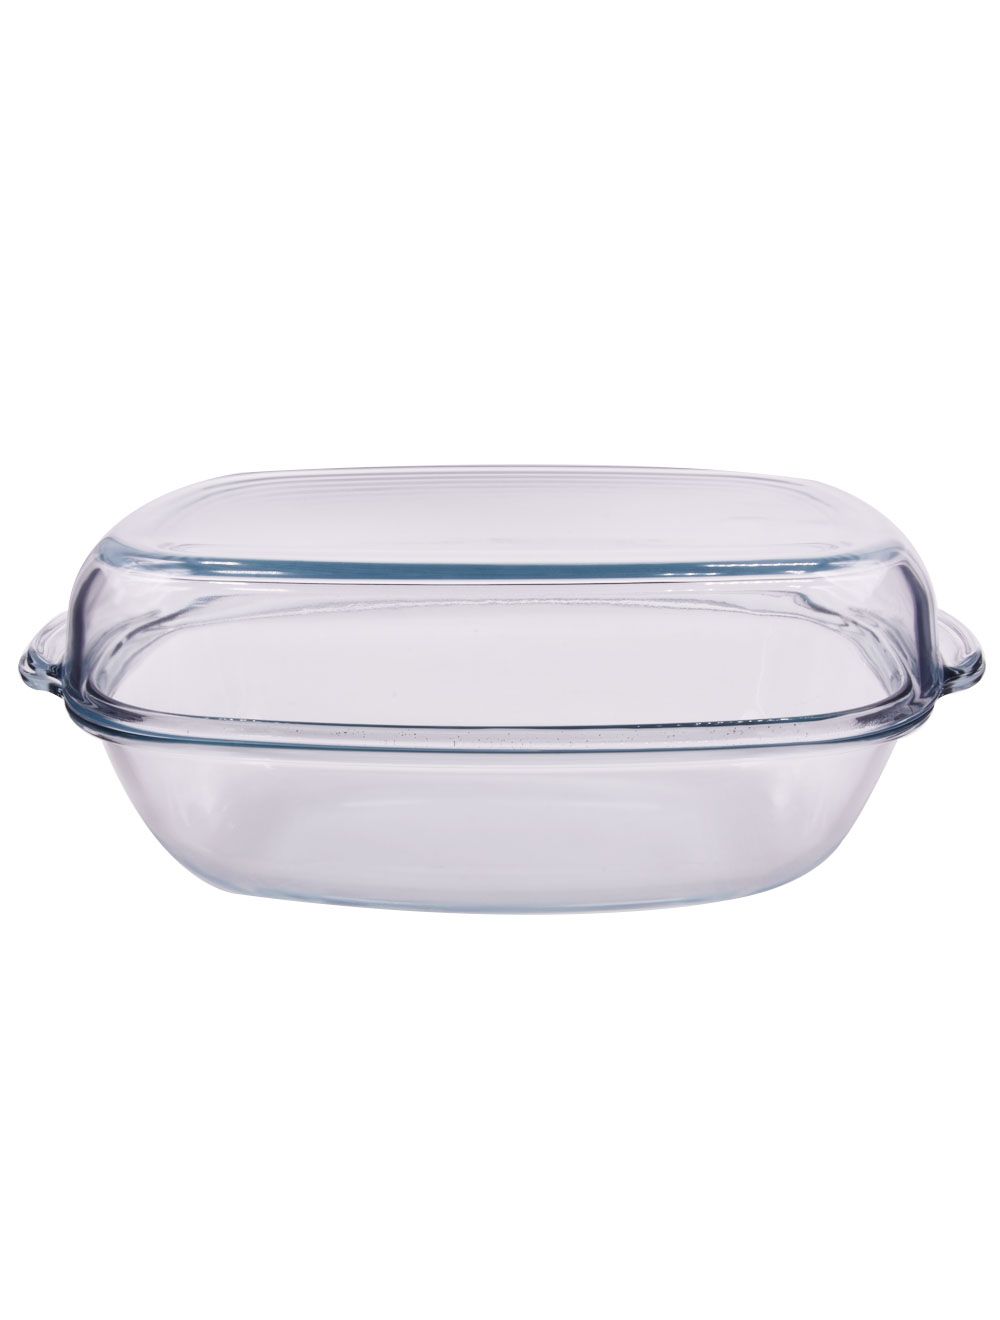 Obl Casserole With Lid